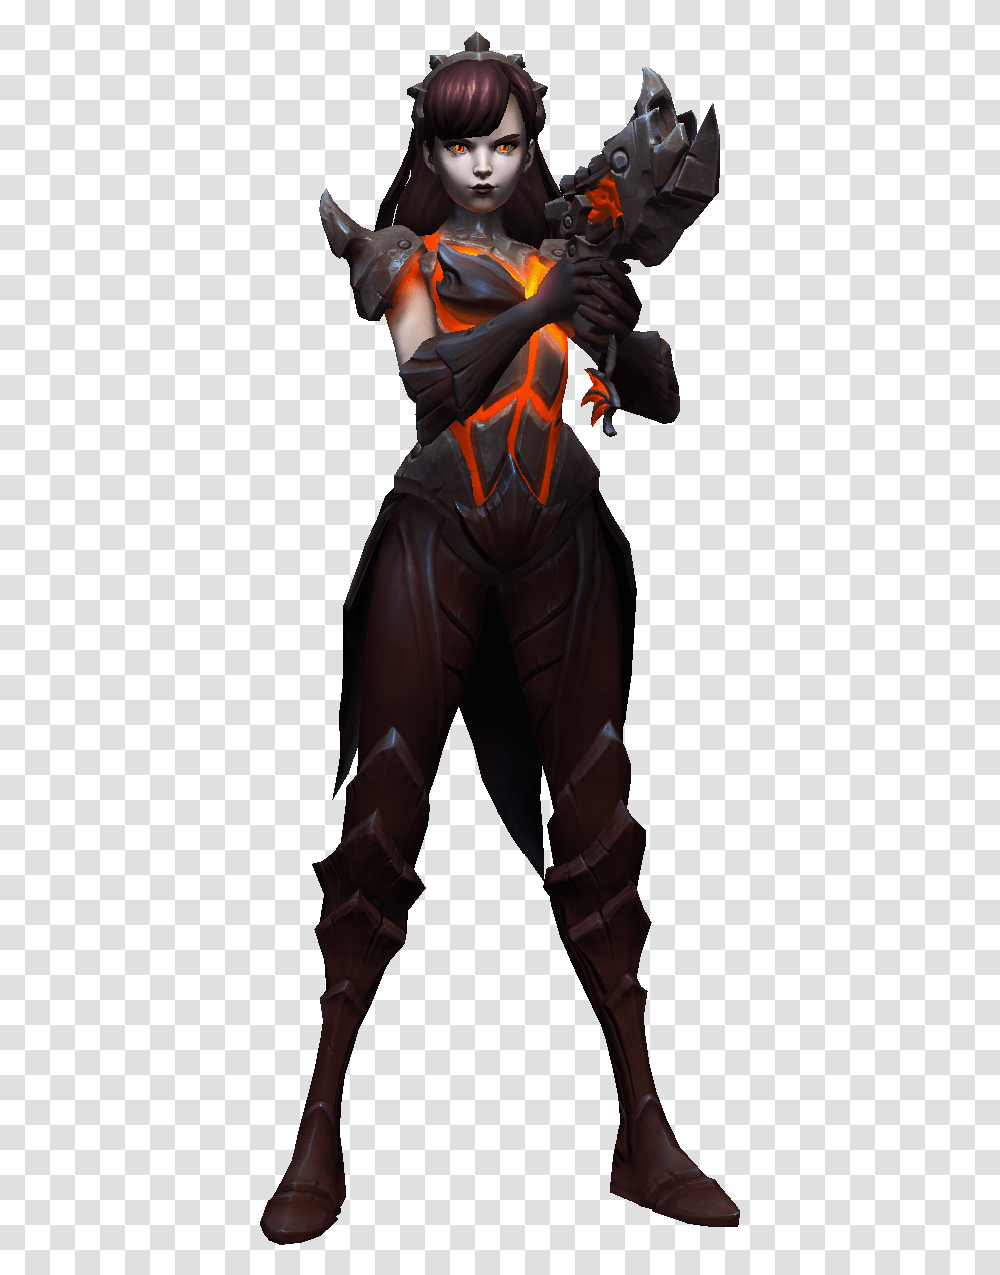 Destroyer Dva Pilot 2 Dva The Destroyer Heroes Of The Storm, Person, Human, Cape Transparent Png